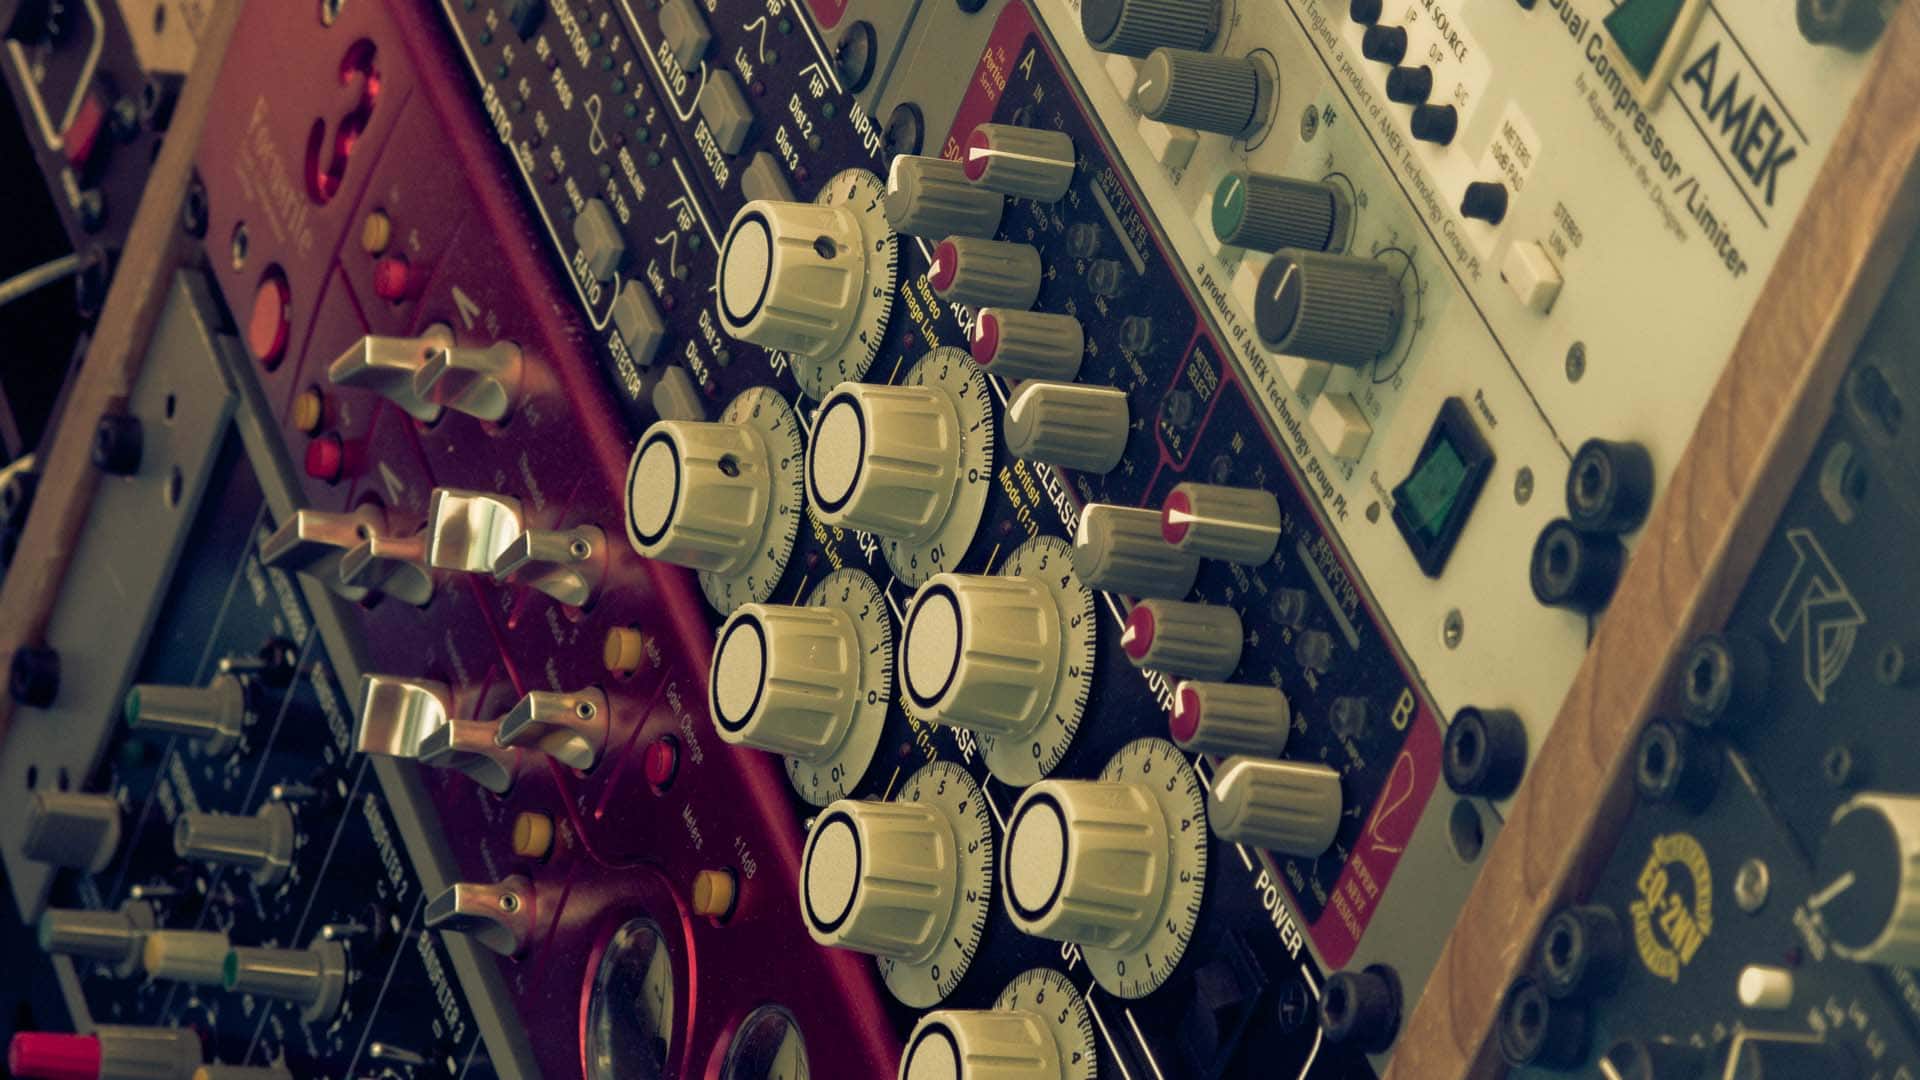 Part of the outboard gear at Unreal Studios where Omega and Quiver were recorded.